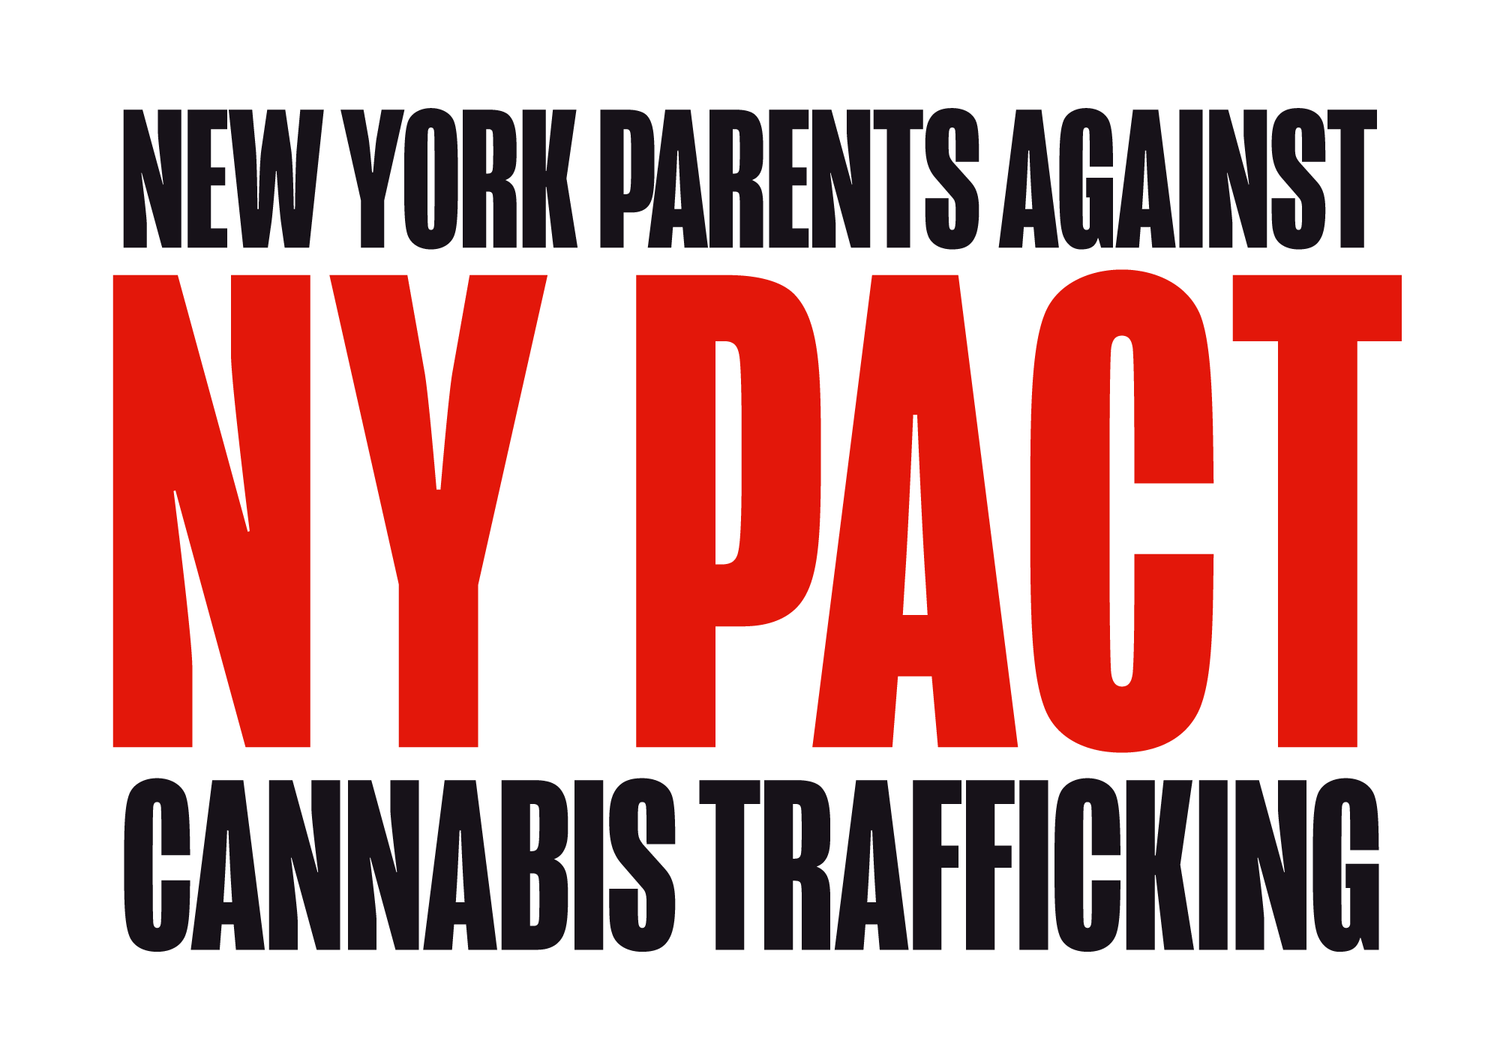 New York Parents Against Cannabis Trafficking